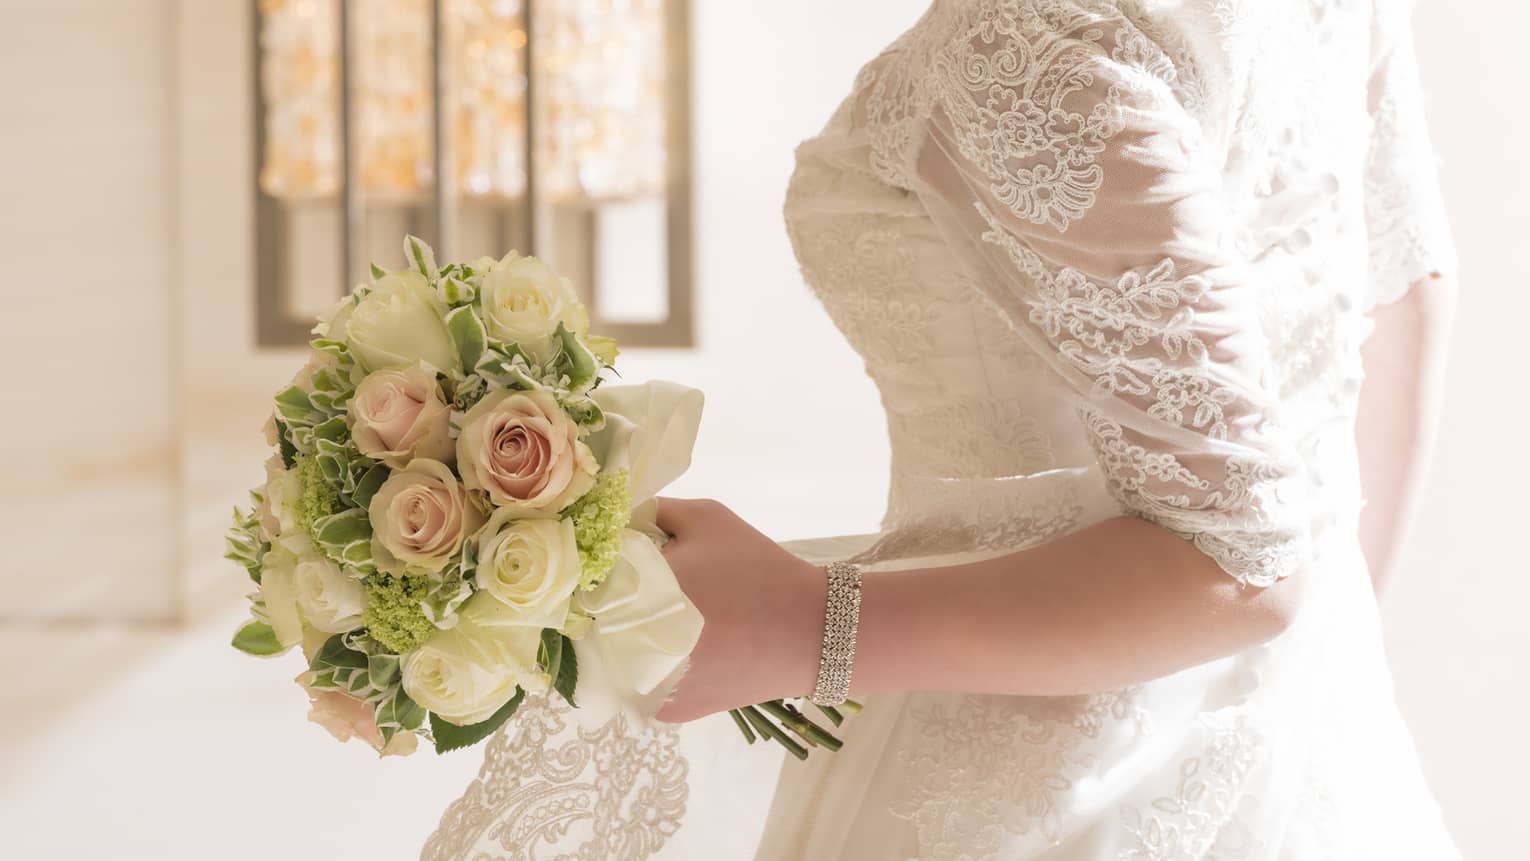 Bride wearing lace wedding gown stands by sunny window, looks down at rose bouquet